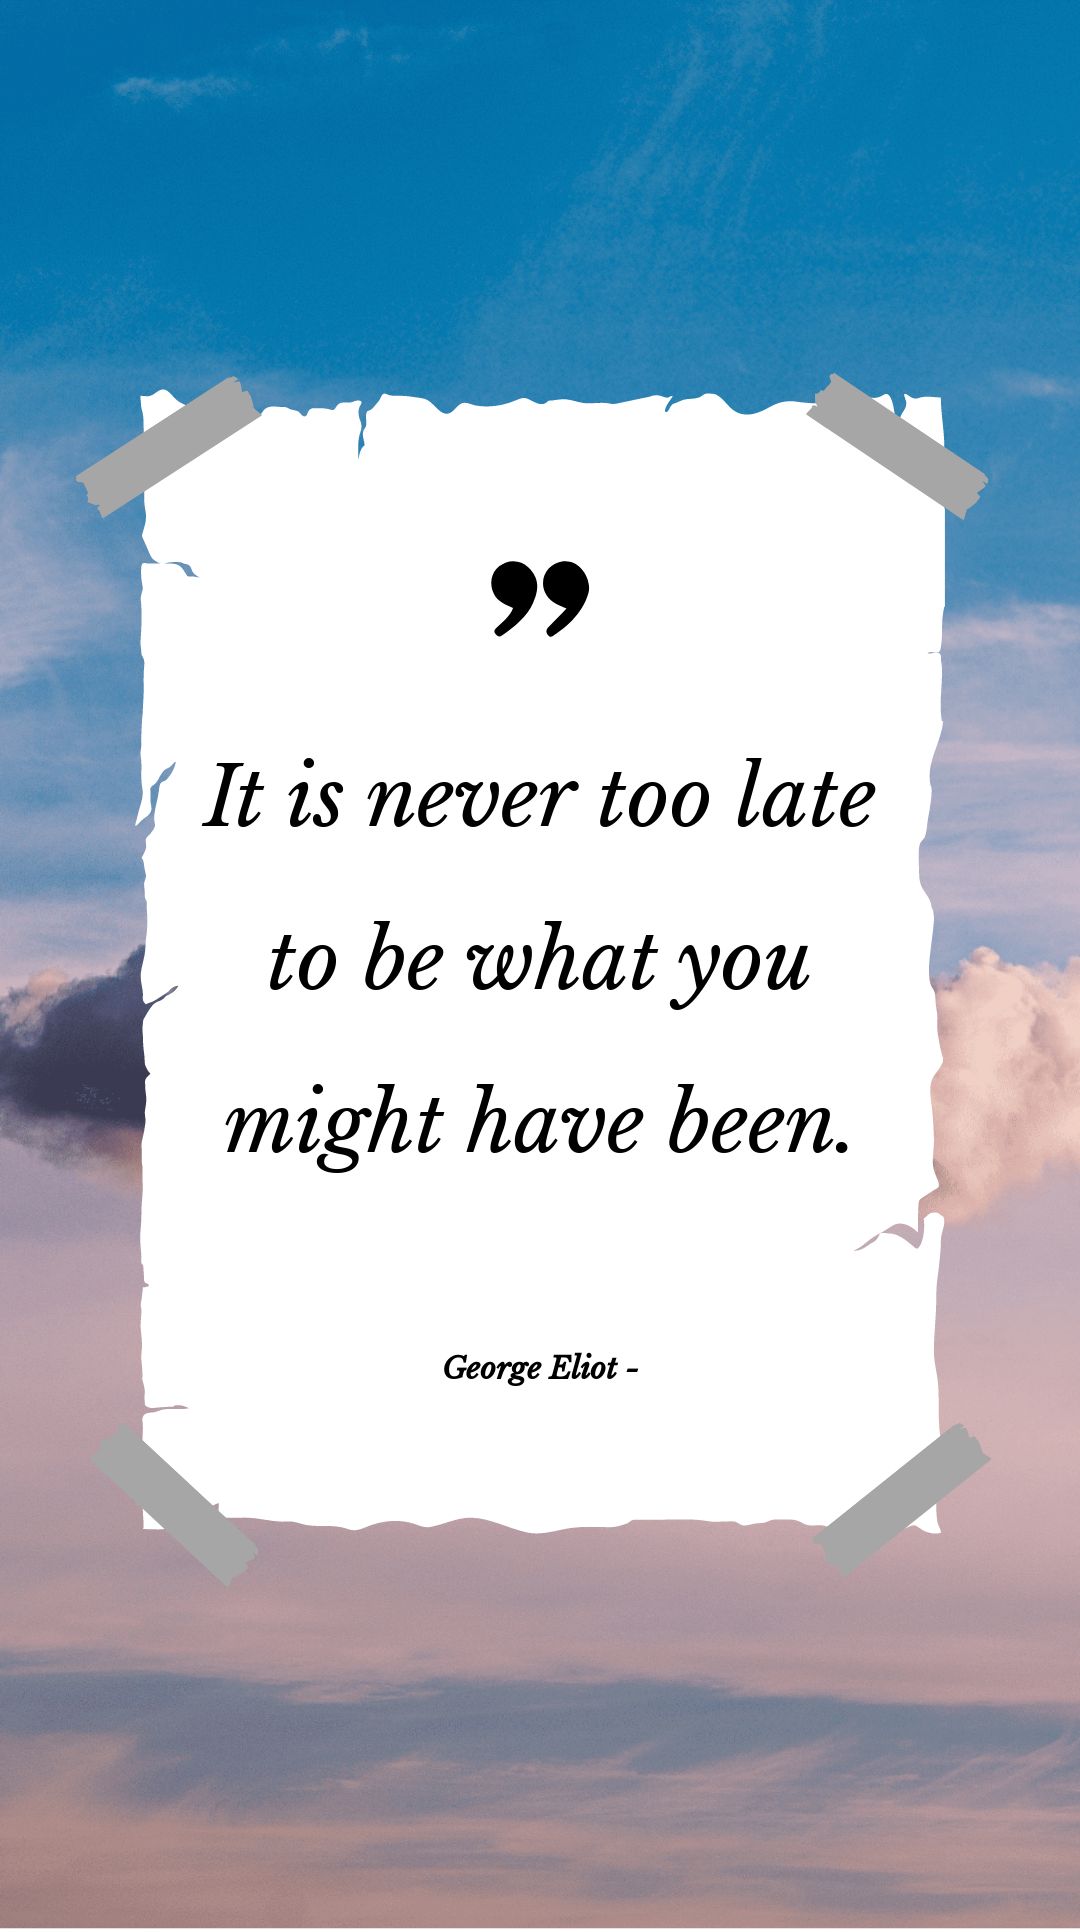 George Eliot - It is never too late to be what you might have been.